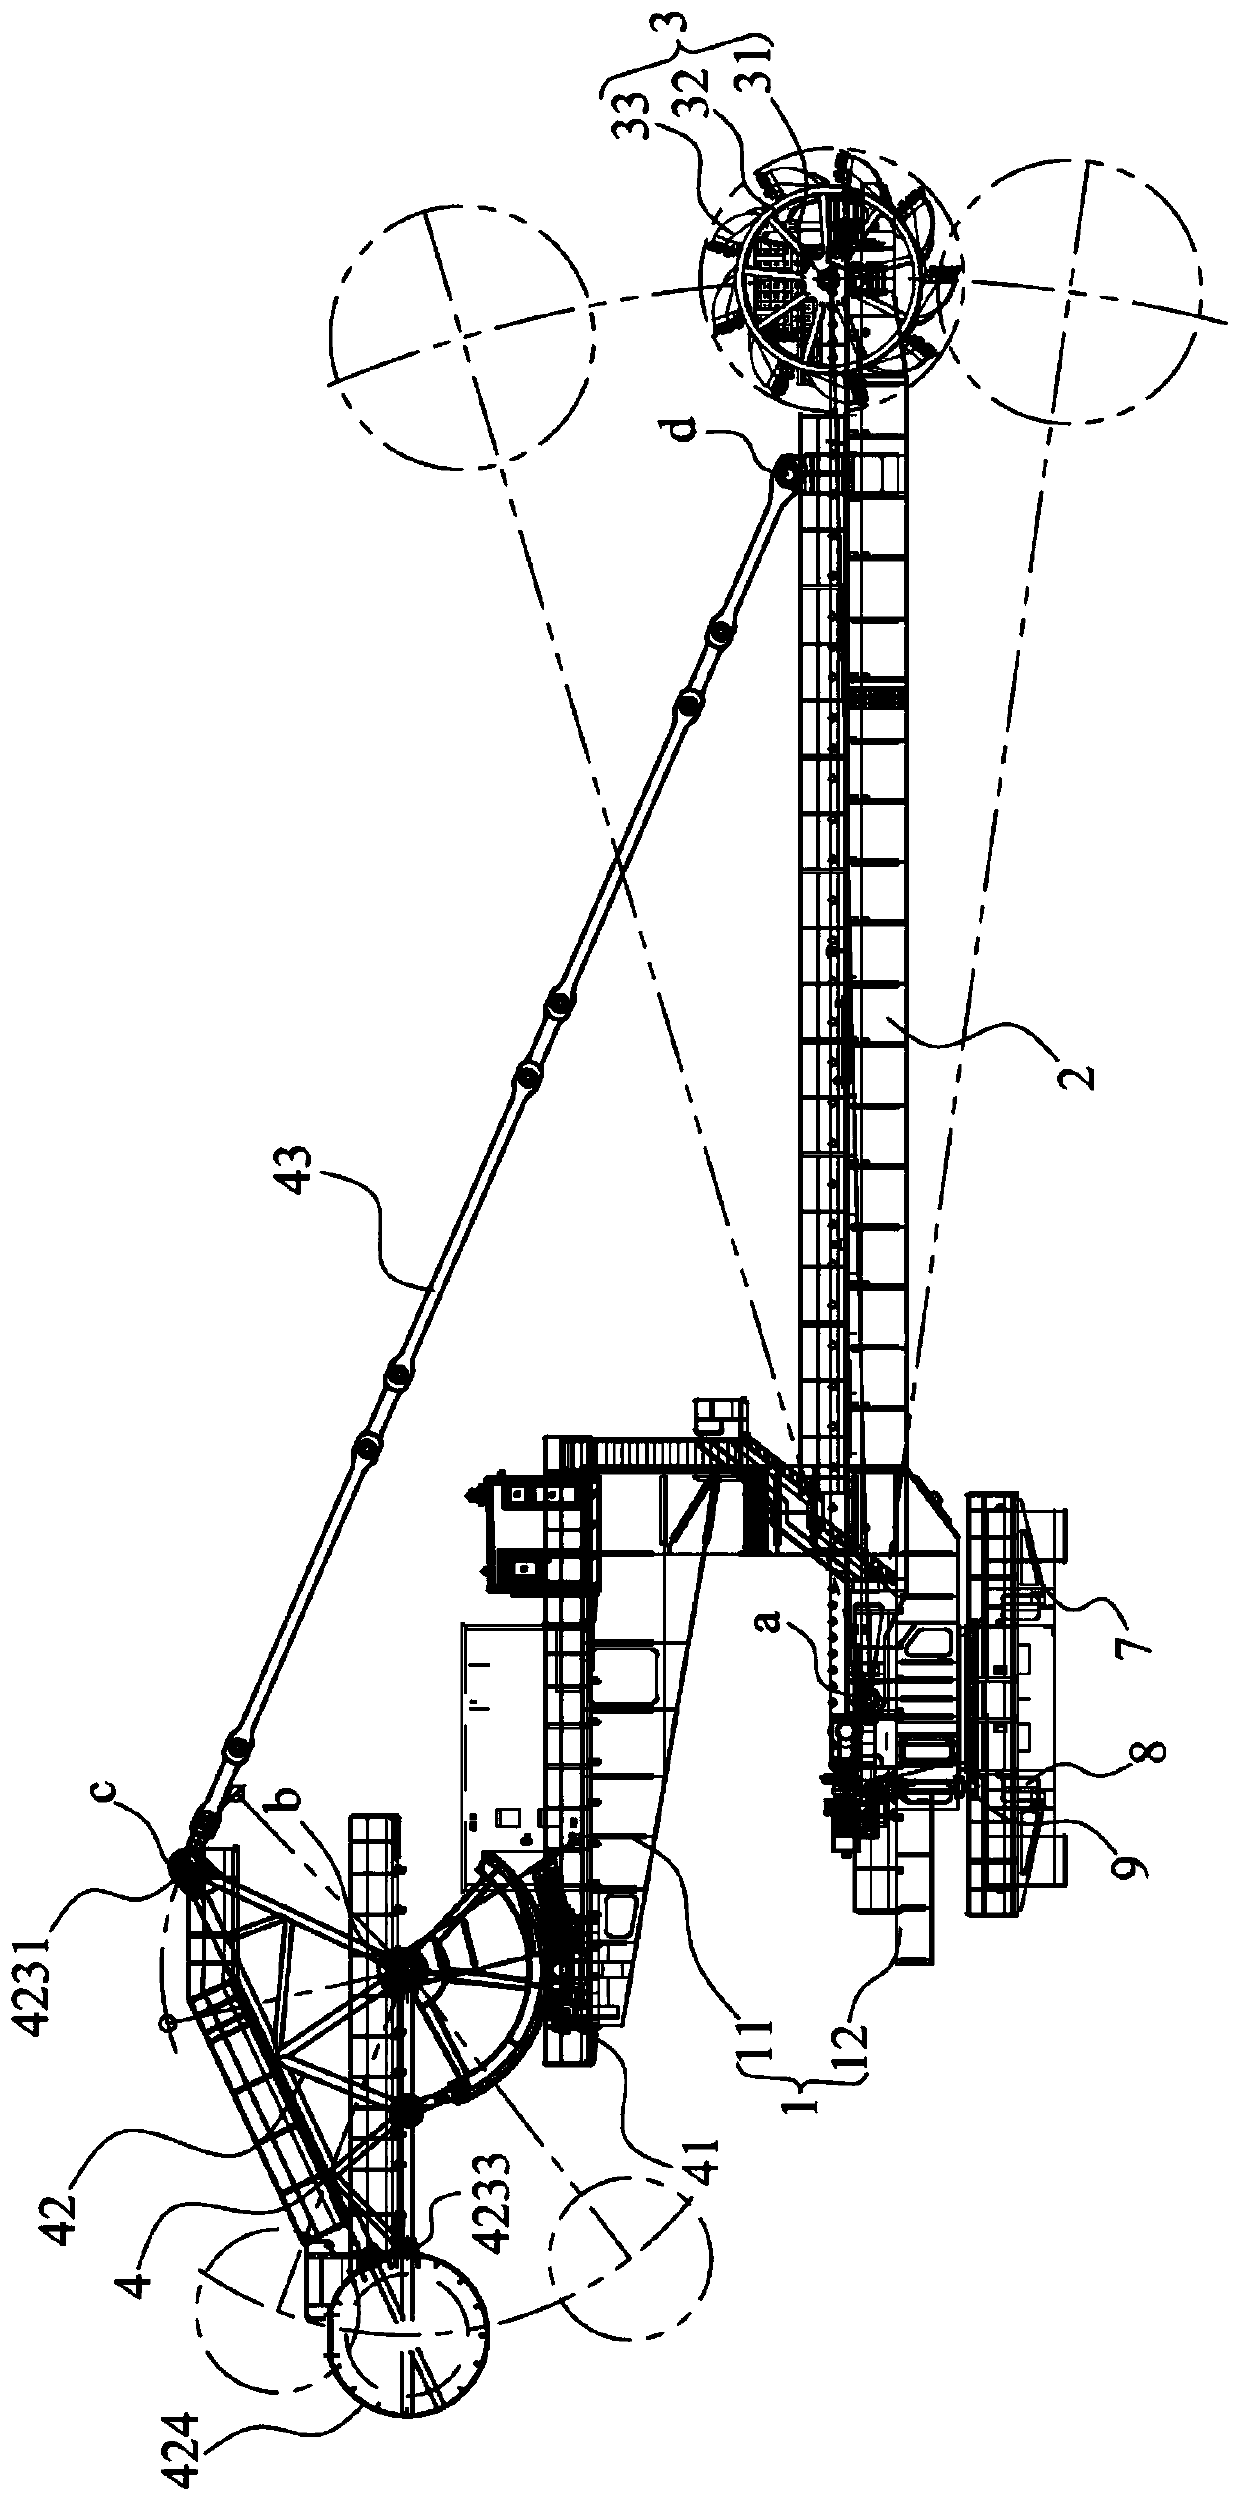 Pitching system and bucket wheel stacking and picking machine